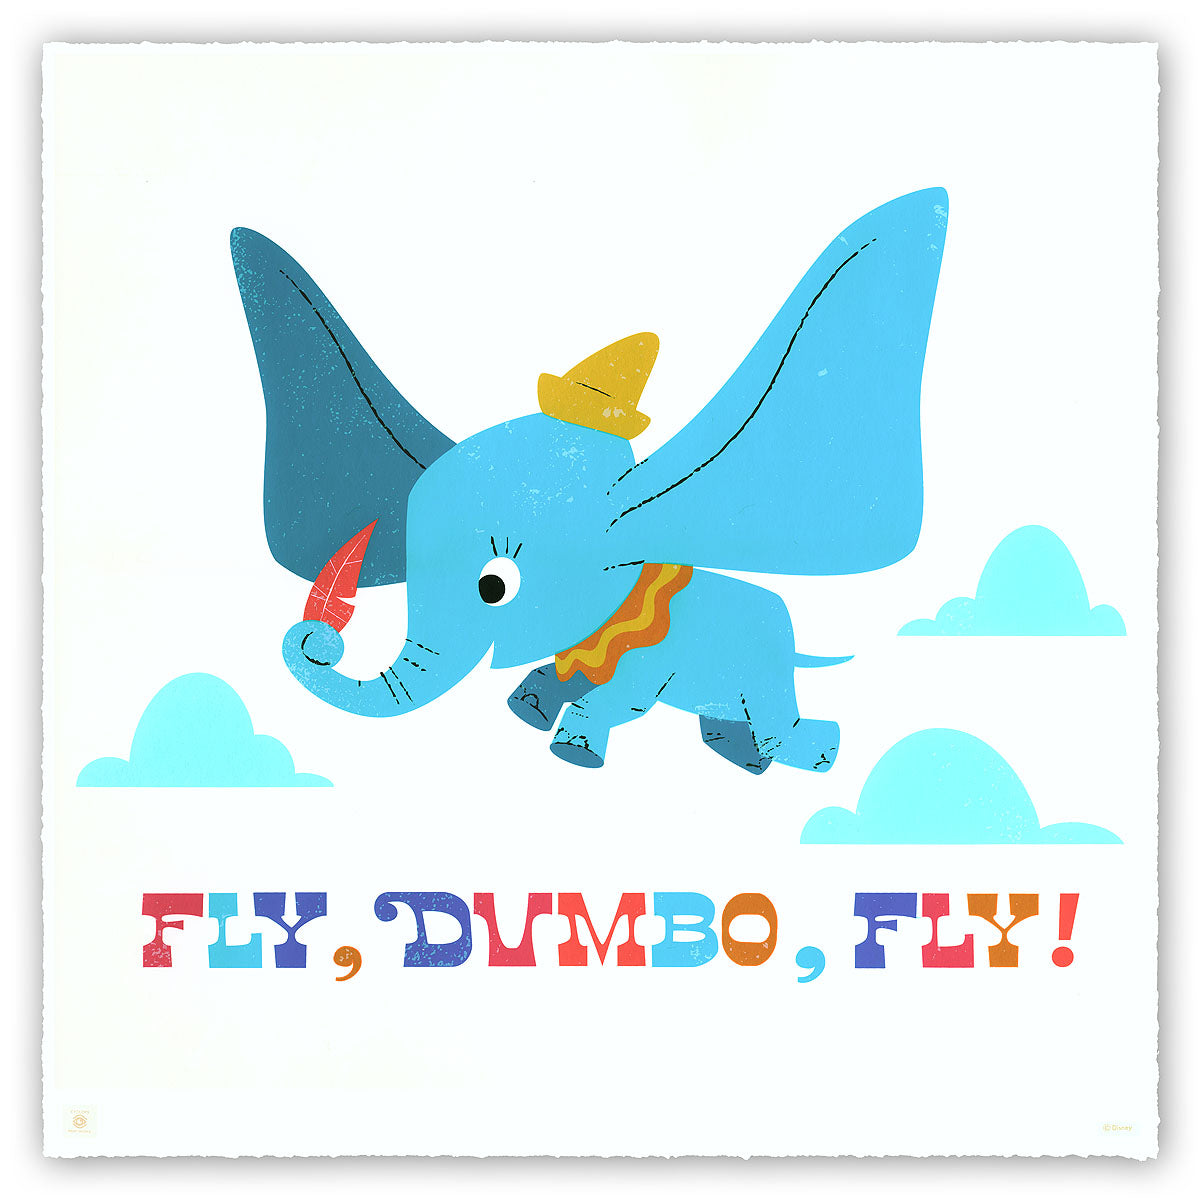 Dumbo by Courtland Lomax